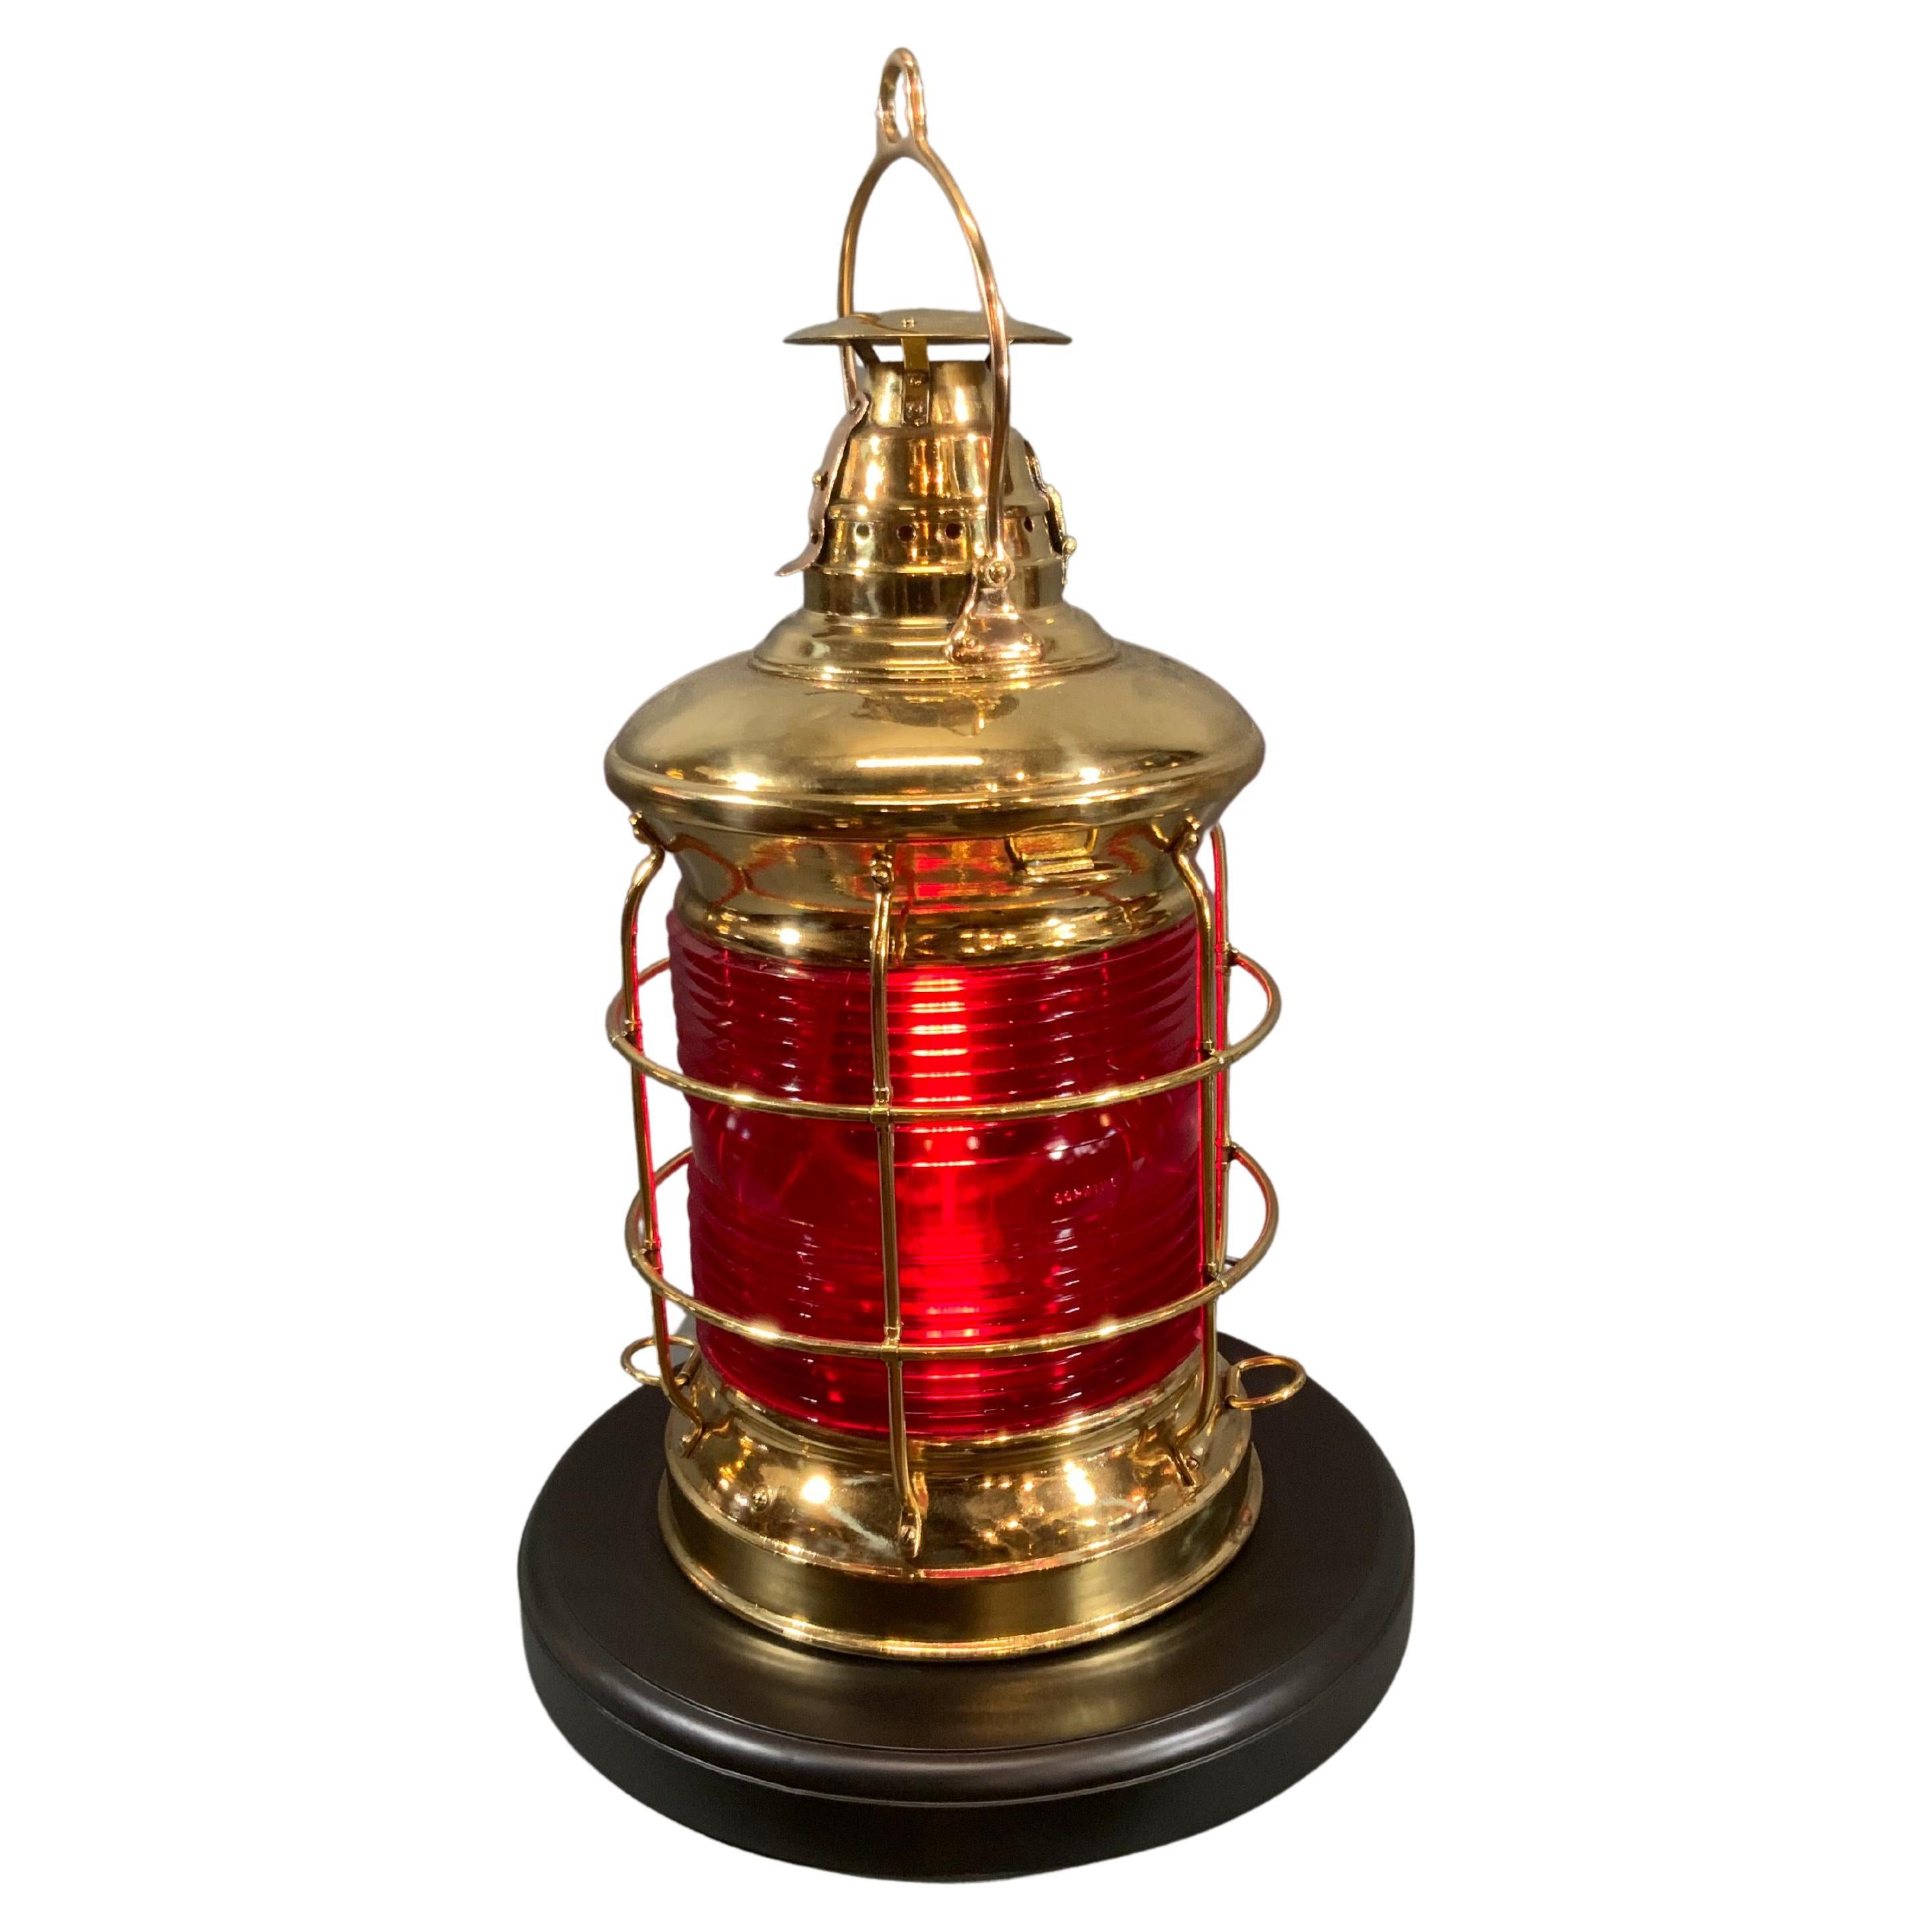 Solid Brass Ship's Lantern by F.H. Lovell Co. of Arlington, New Jersey For Sale